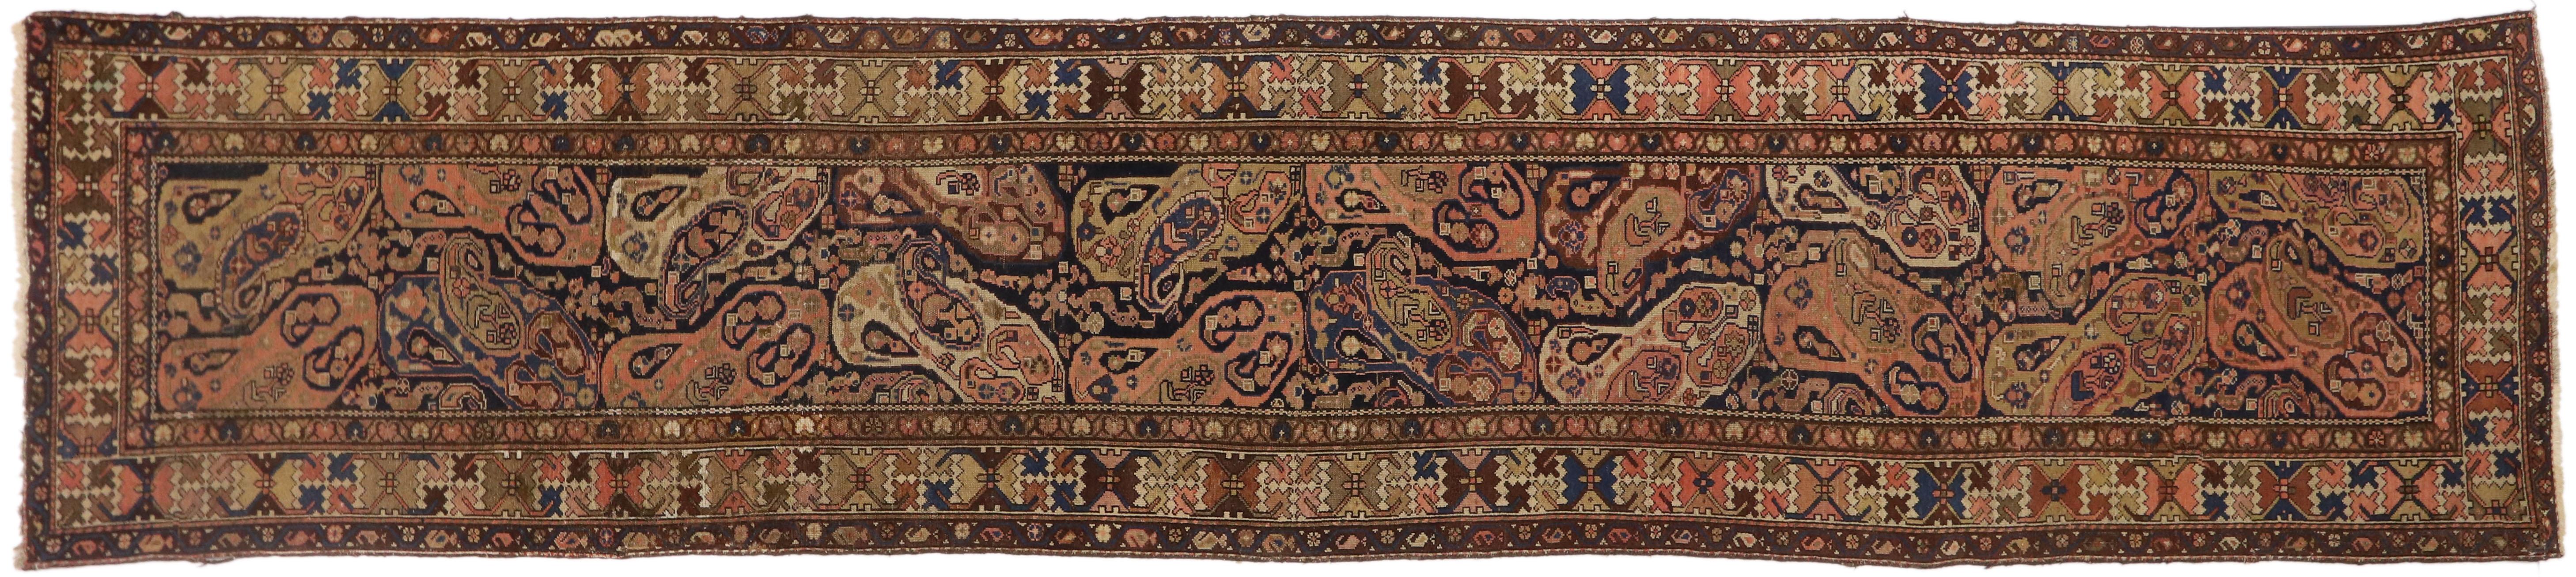 Antique Persian Malayer Runner with Boteh Design, Extra-Long Hallway Runner For Sale 3